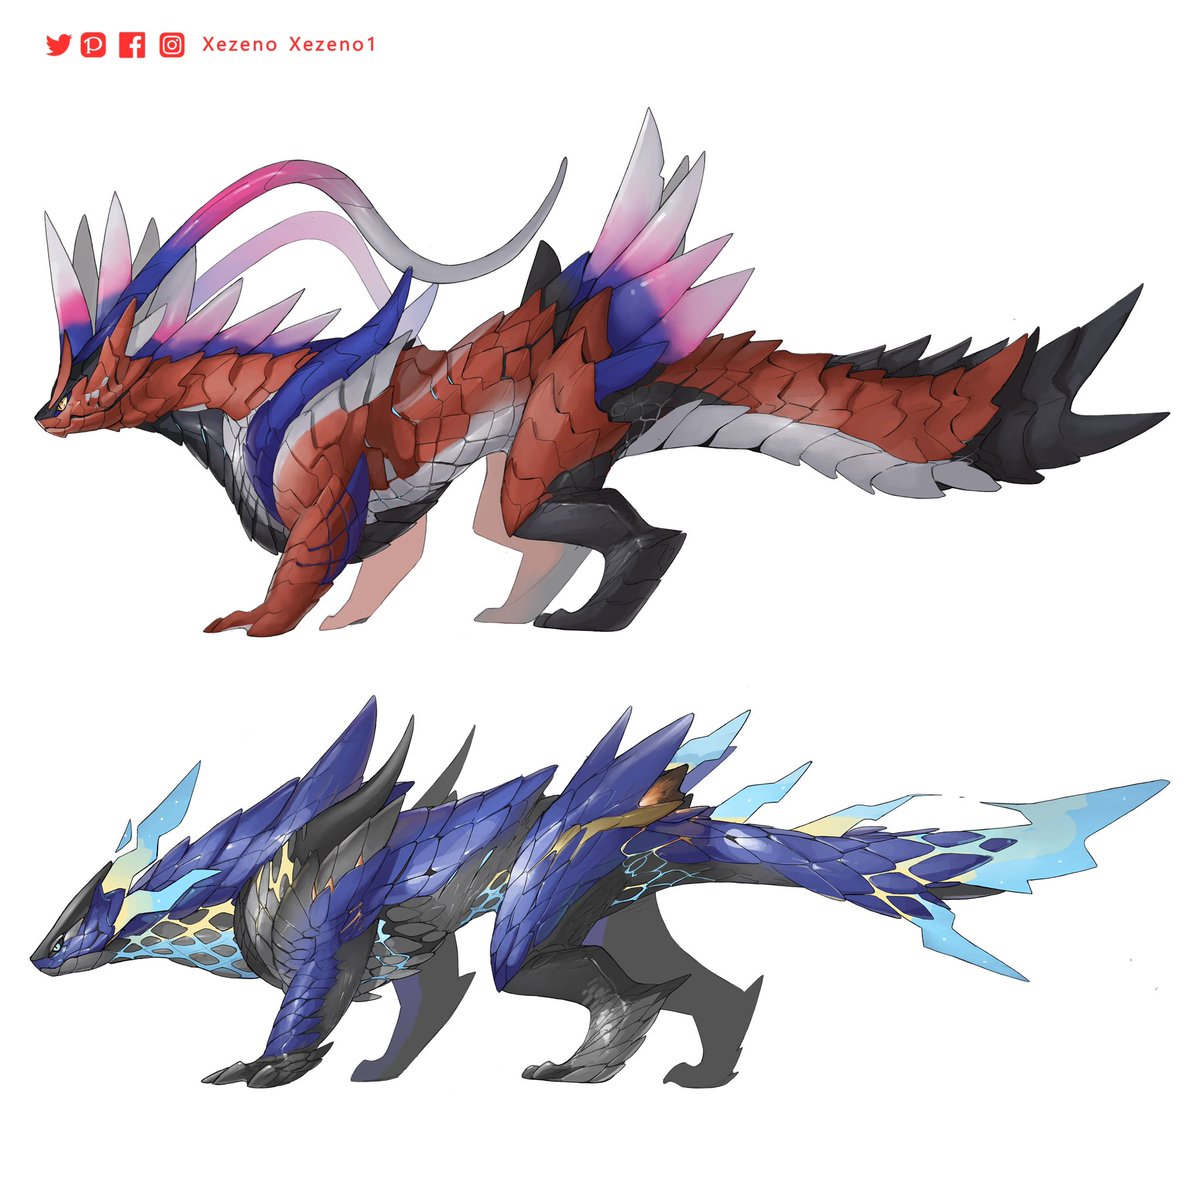 「2 sandwich dragons in Monster Hunter art」|Marcus Hiiのイラスト